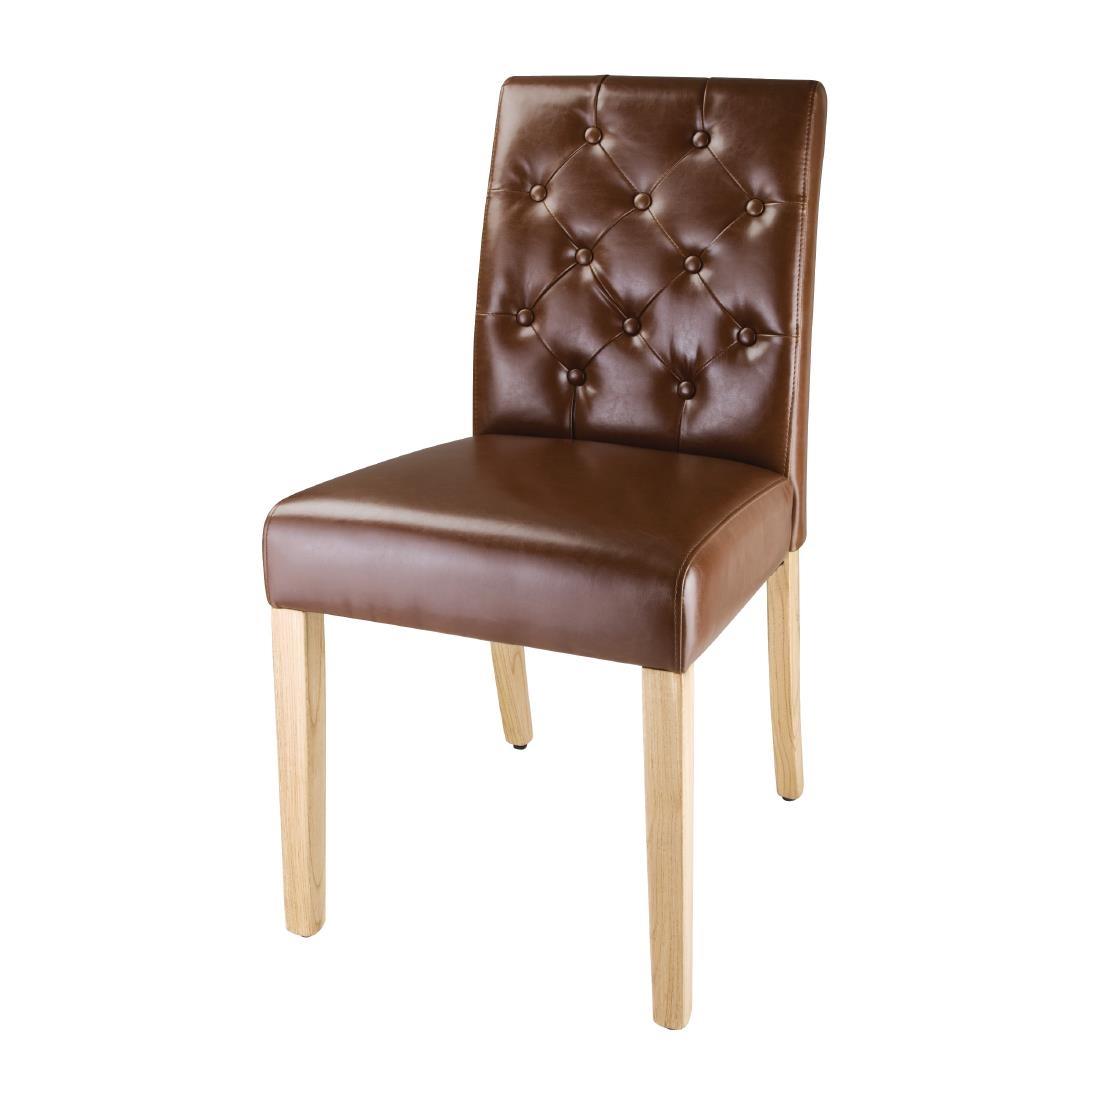 Bolero Chiswick Button Dining Chairs Tan Leather (Pack of 2) - DT699  - 1